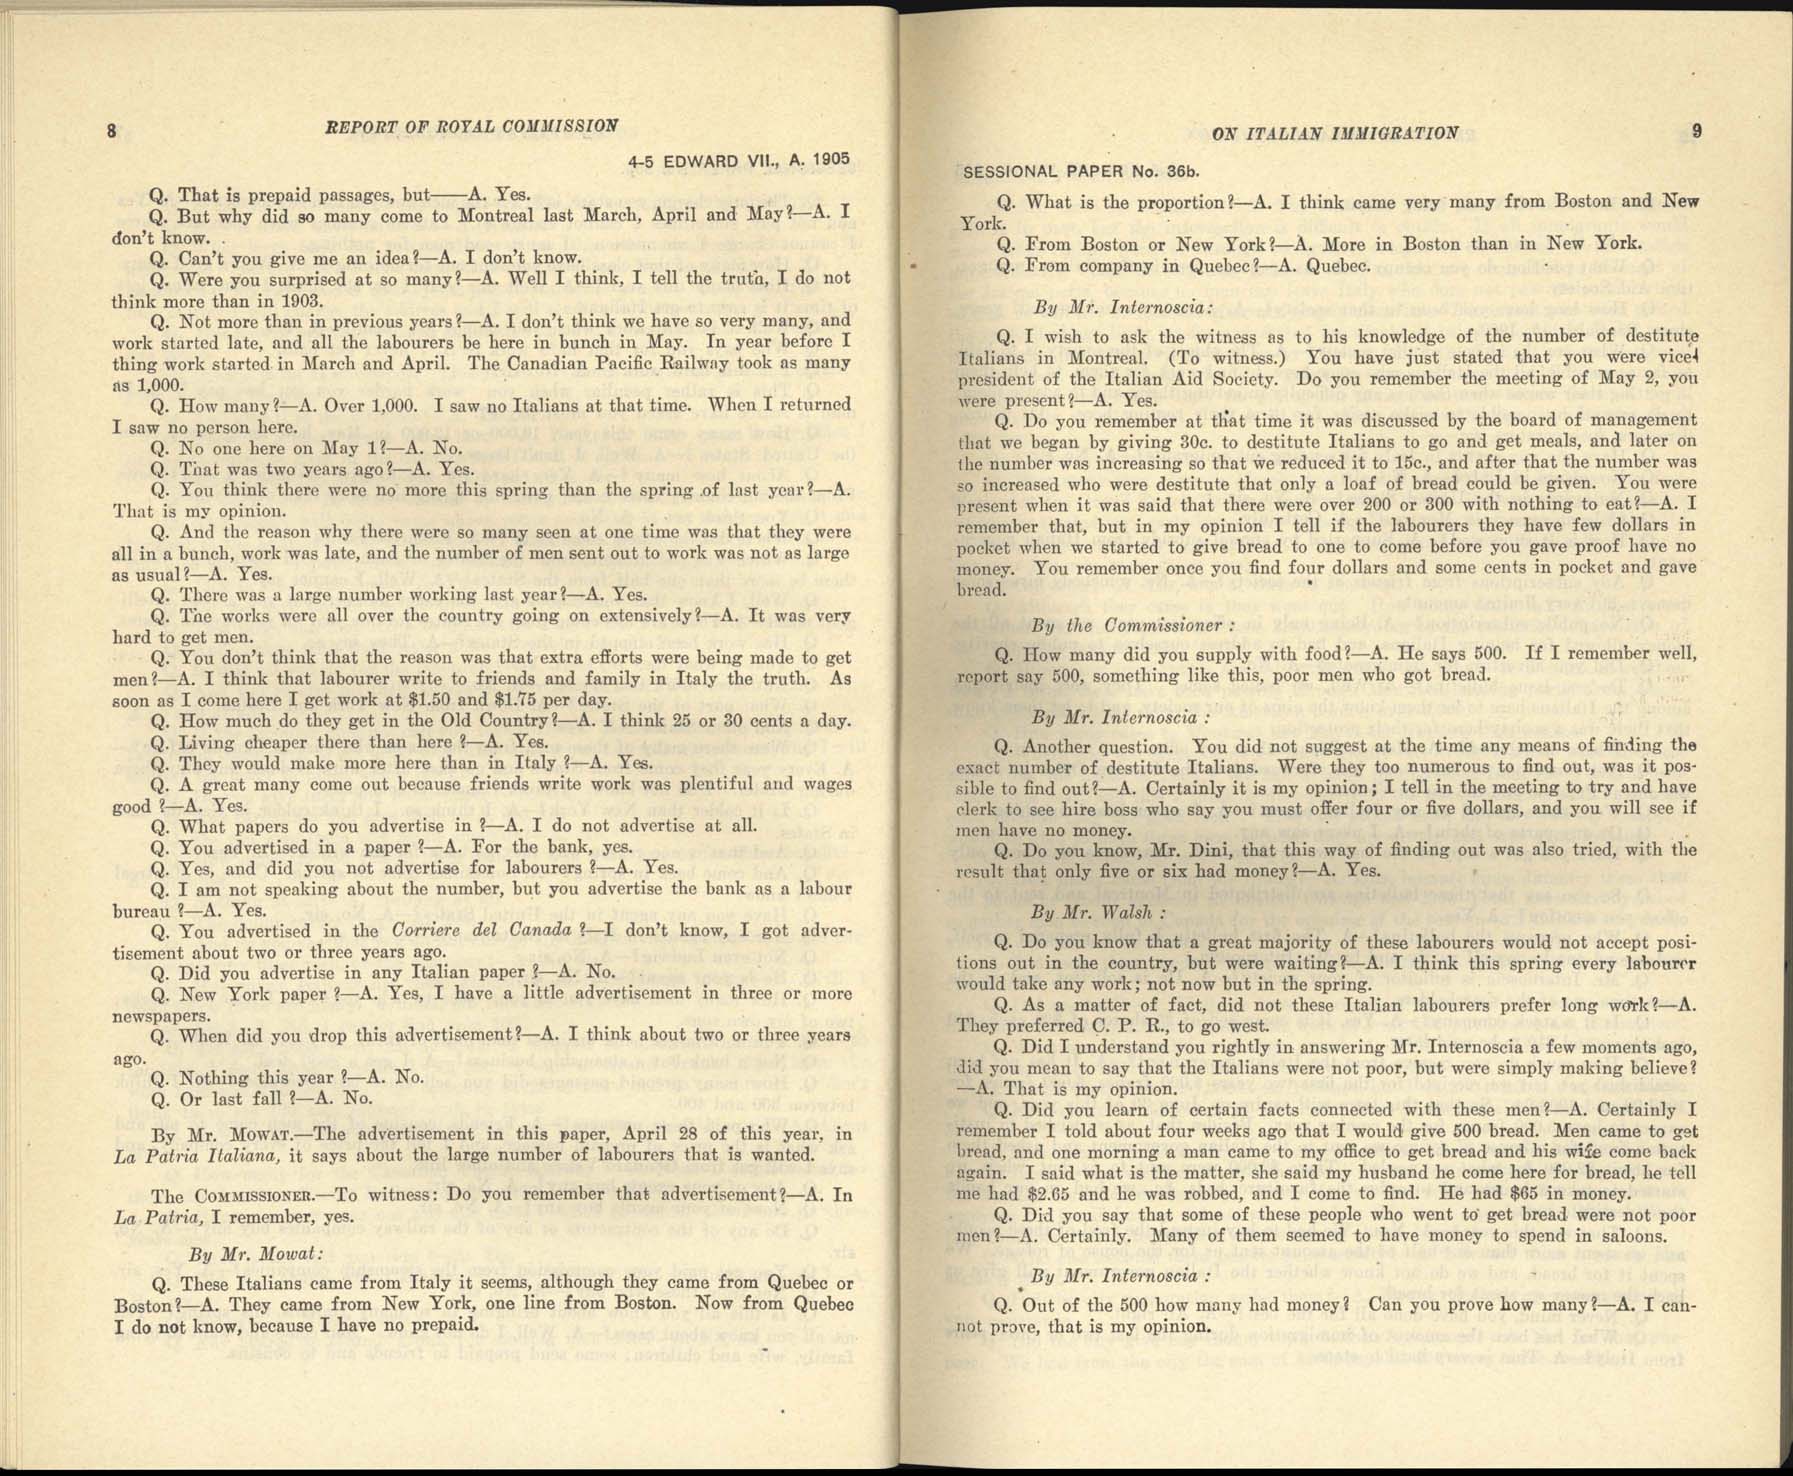 Page 8, 9 Royal Commission on Italian Immigration, 1904-1905